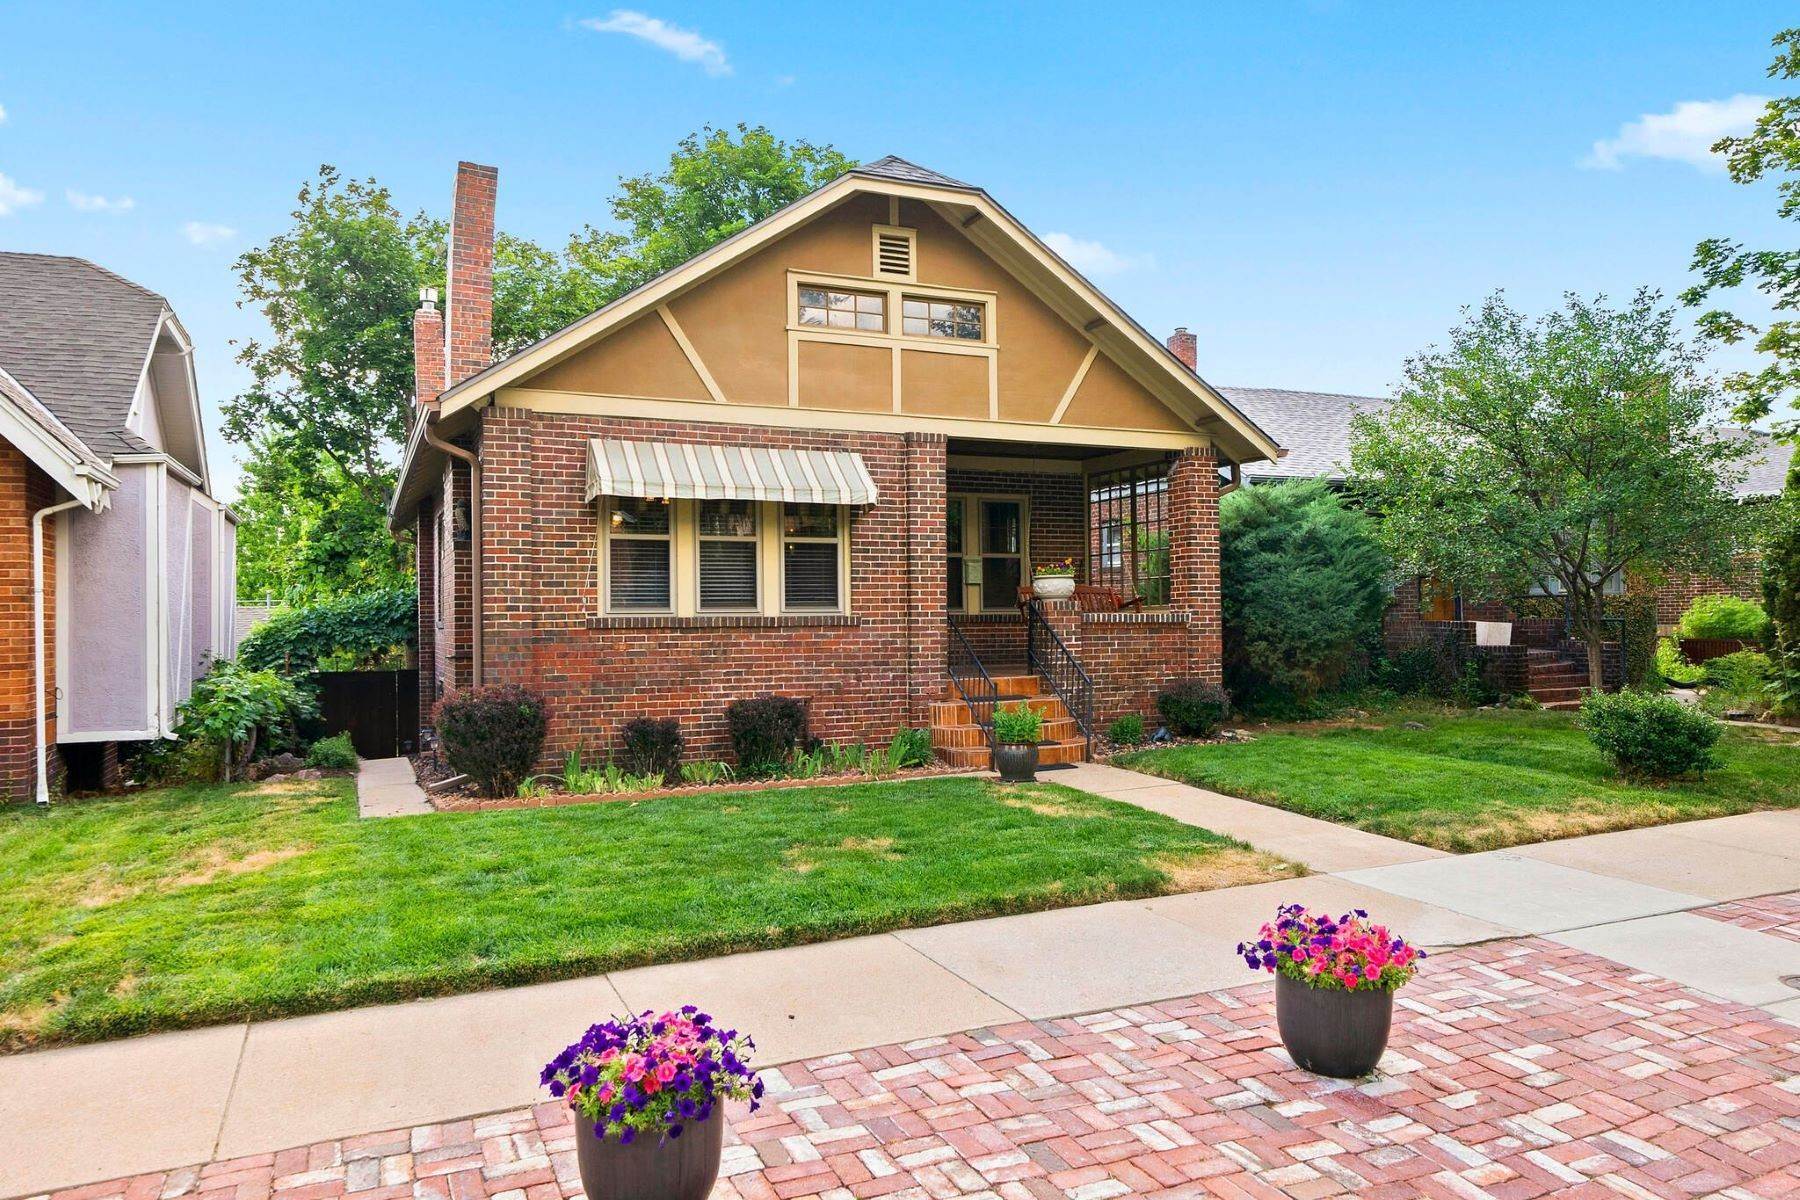 6. Single Family Homes for Active at Quintessentially craftsman style, this 1920 bungalow enthralls from first glance 333 S Clarkson Street Denver, Colorado 80209 United States